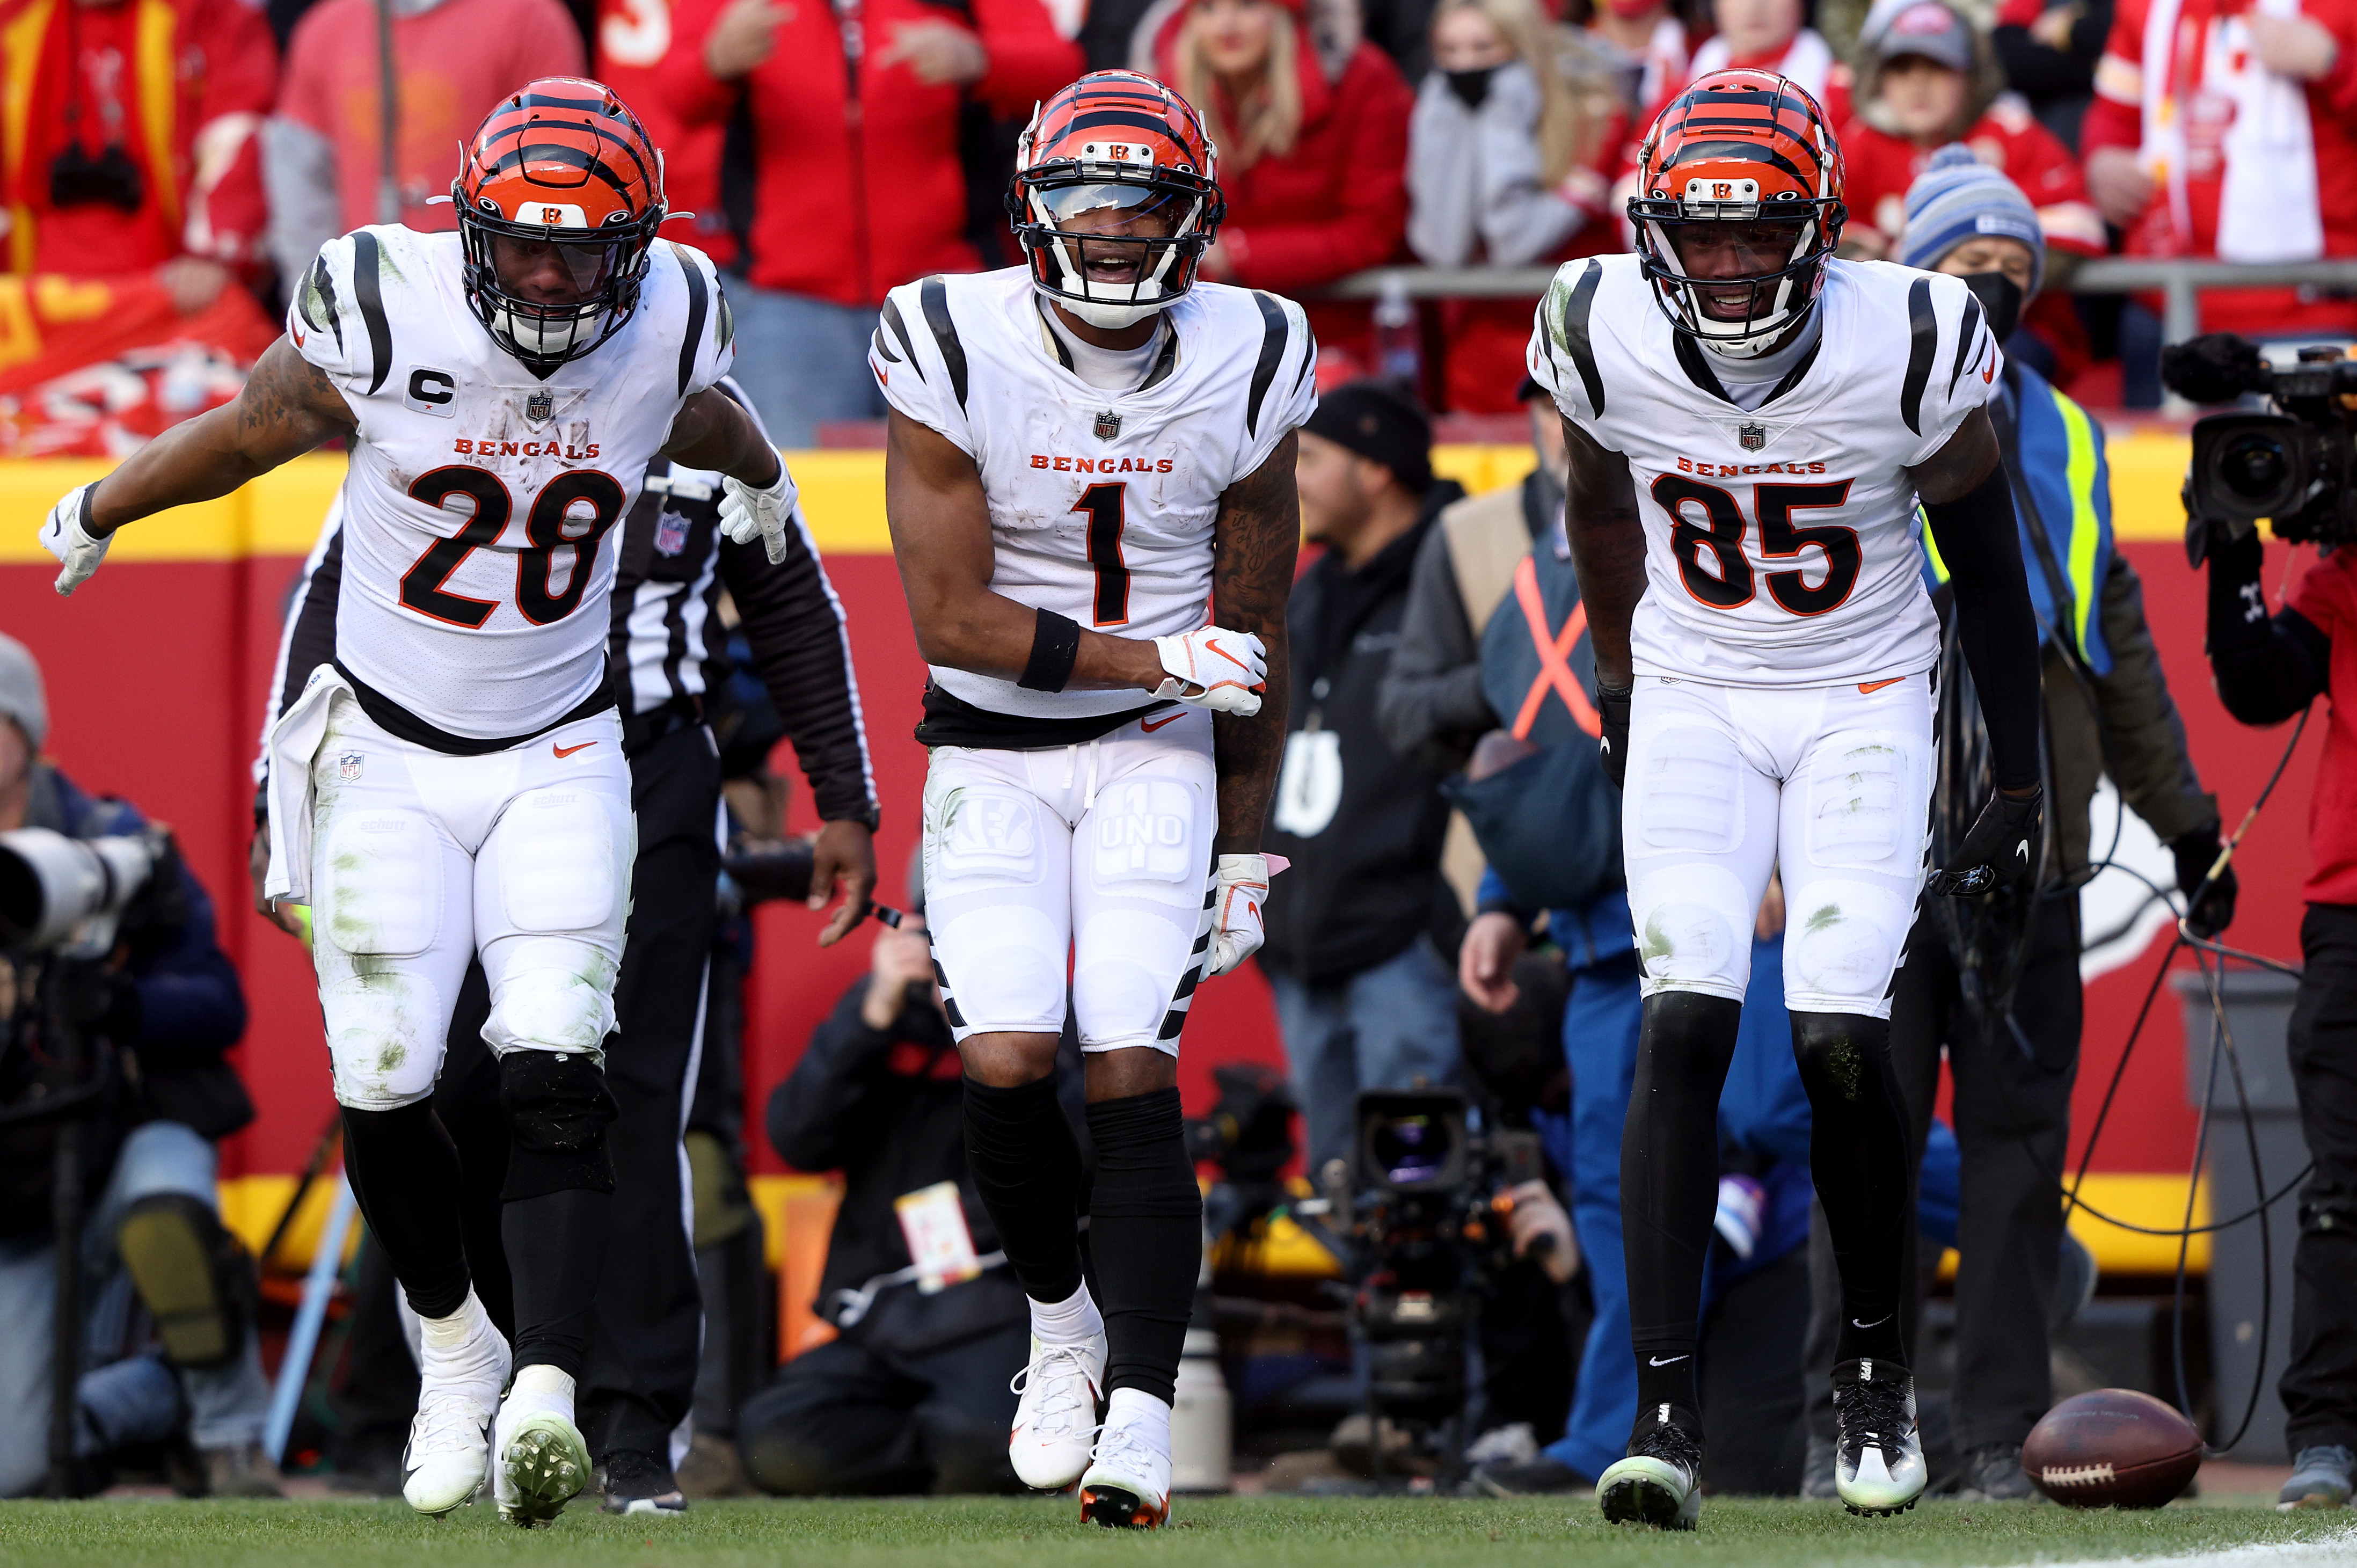 The Bengals are going to the Super Bowl!  The Cincinnati Bengals come back  from an 18-point deficit to defeat The Kansas City Chiefs 27-24 in OT and  advance to Super Bowl